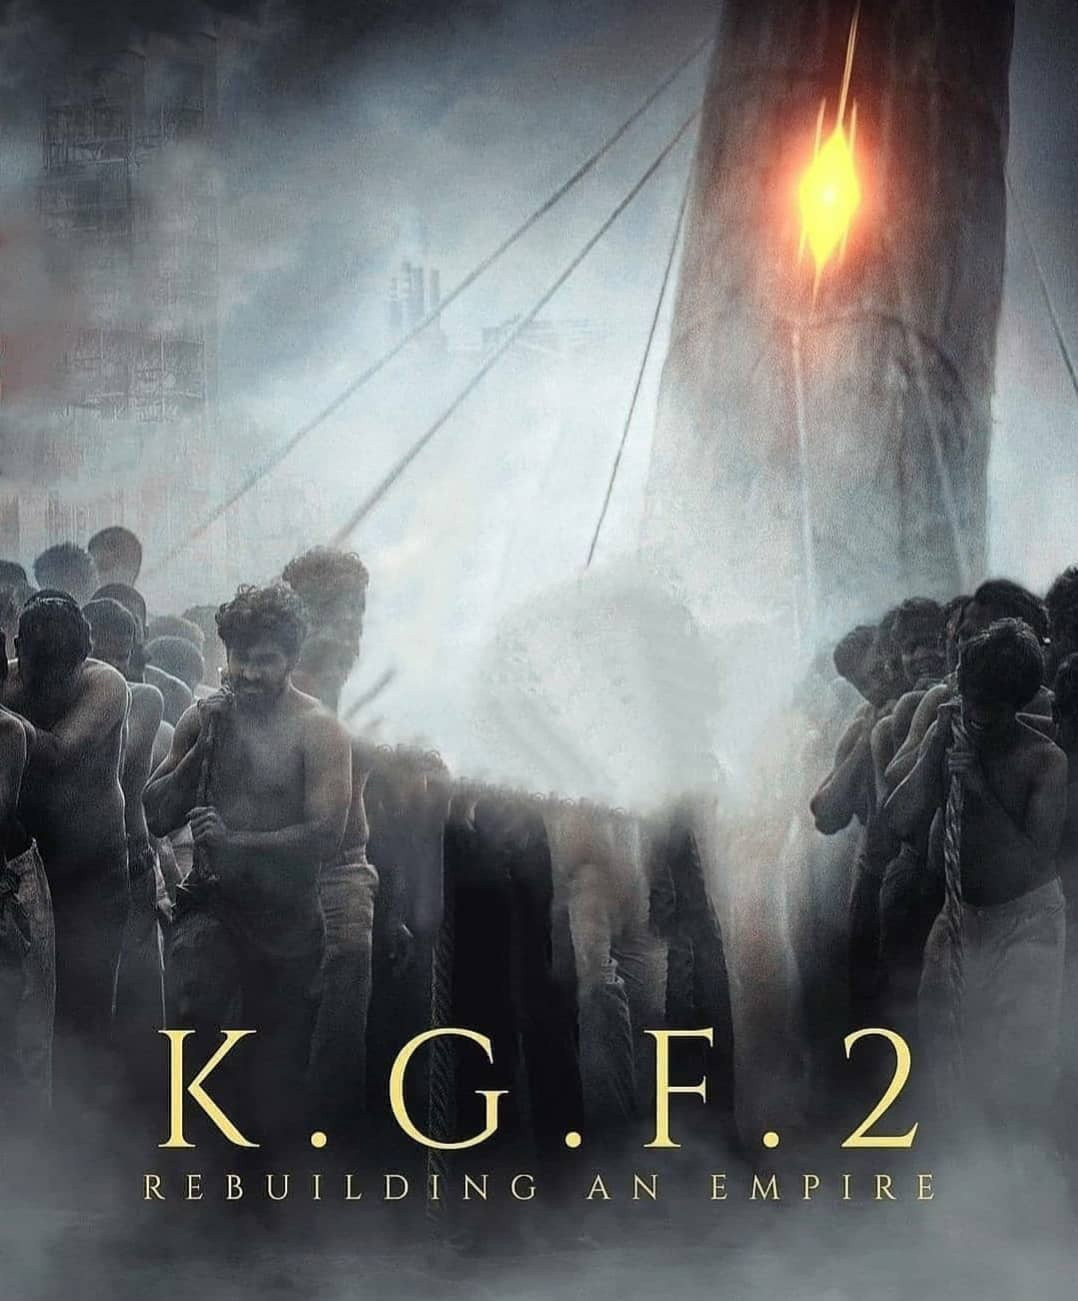 KGF 2 Movie Poster PicsArt Background Free Stock Image